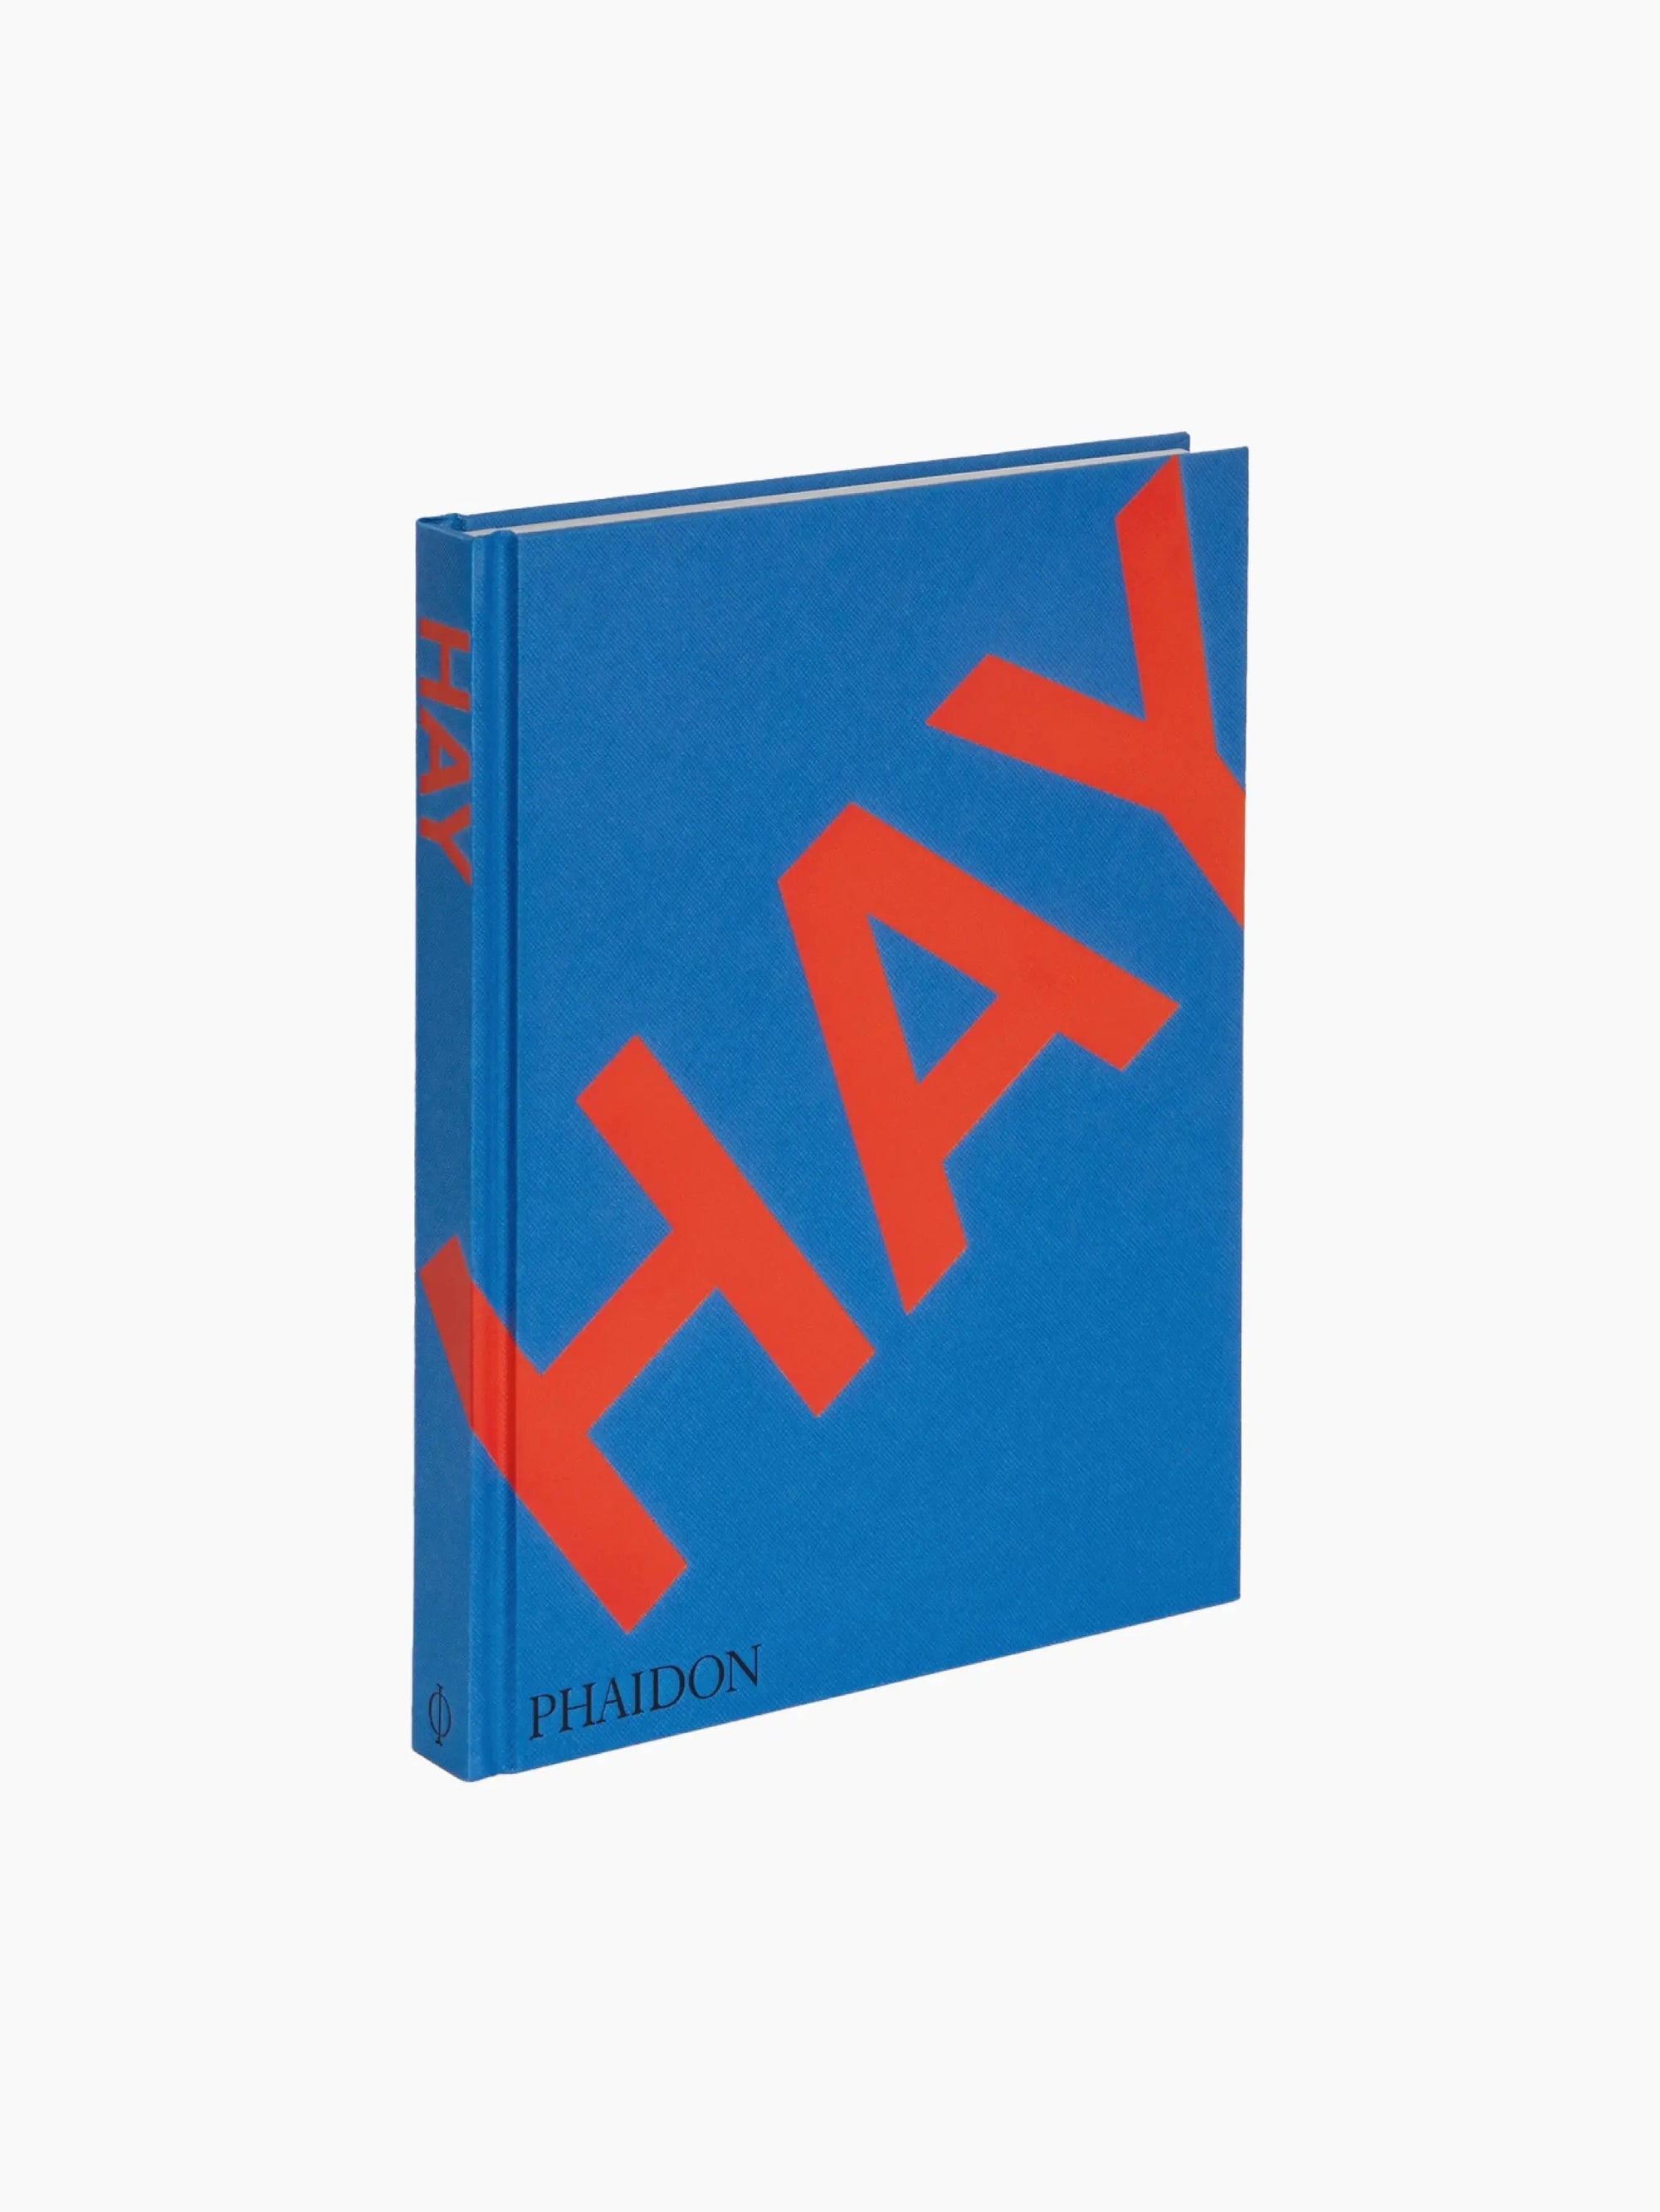 A blue hardcover book with the word "HAY" in large red letters diagonally across the front cover. The spine also features "HAY" in red text, while the bottom has "Phaidon" printed smaller. Perfect for any store, its plain white background makes it a standout piece.